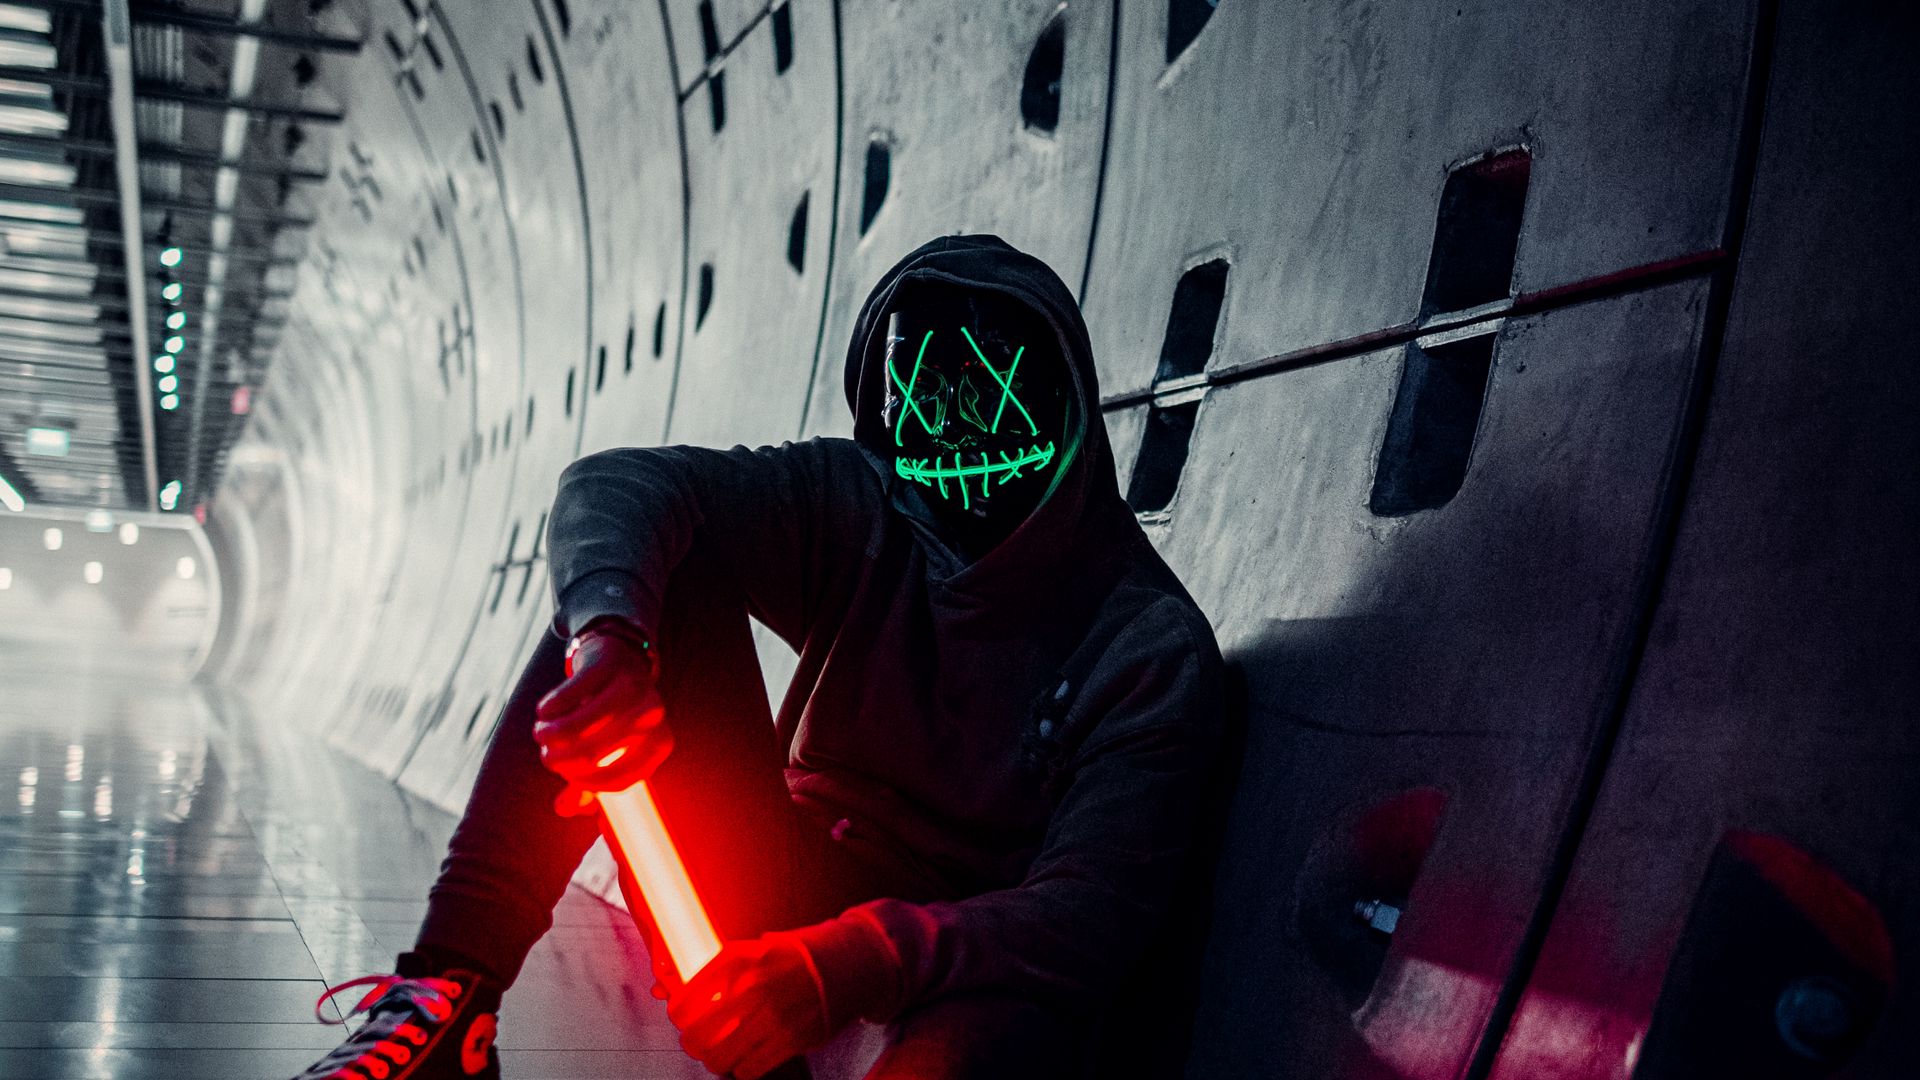 Download wallpaper 1920x1080 man, anonymous, mask, neon, tunnel full hd,  hdtv, fhd, 1080p hd background